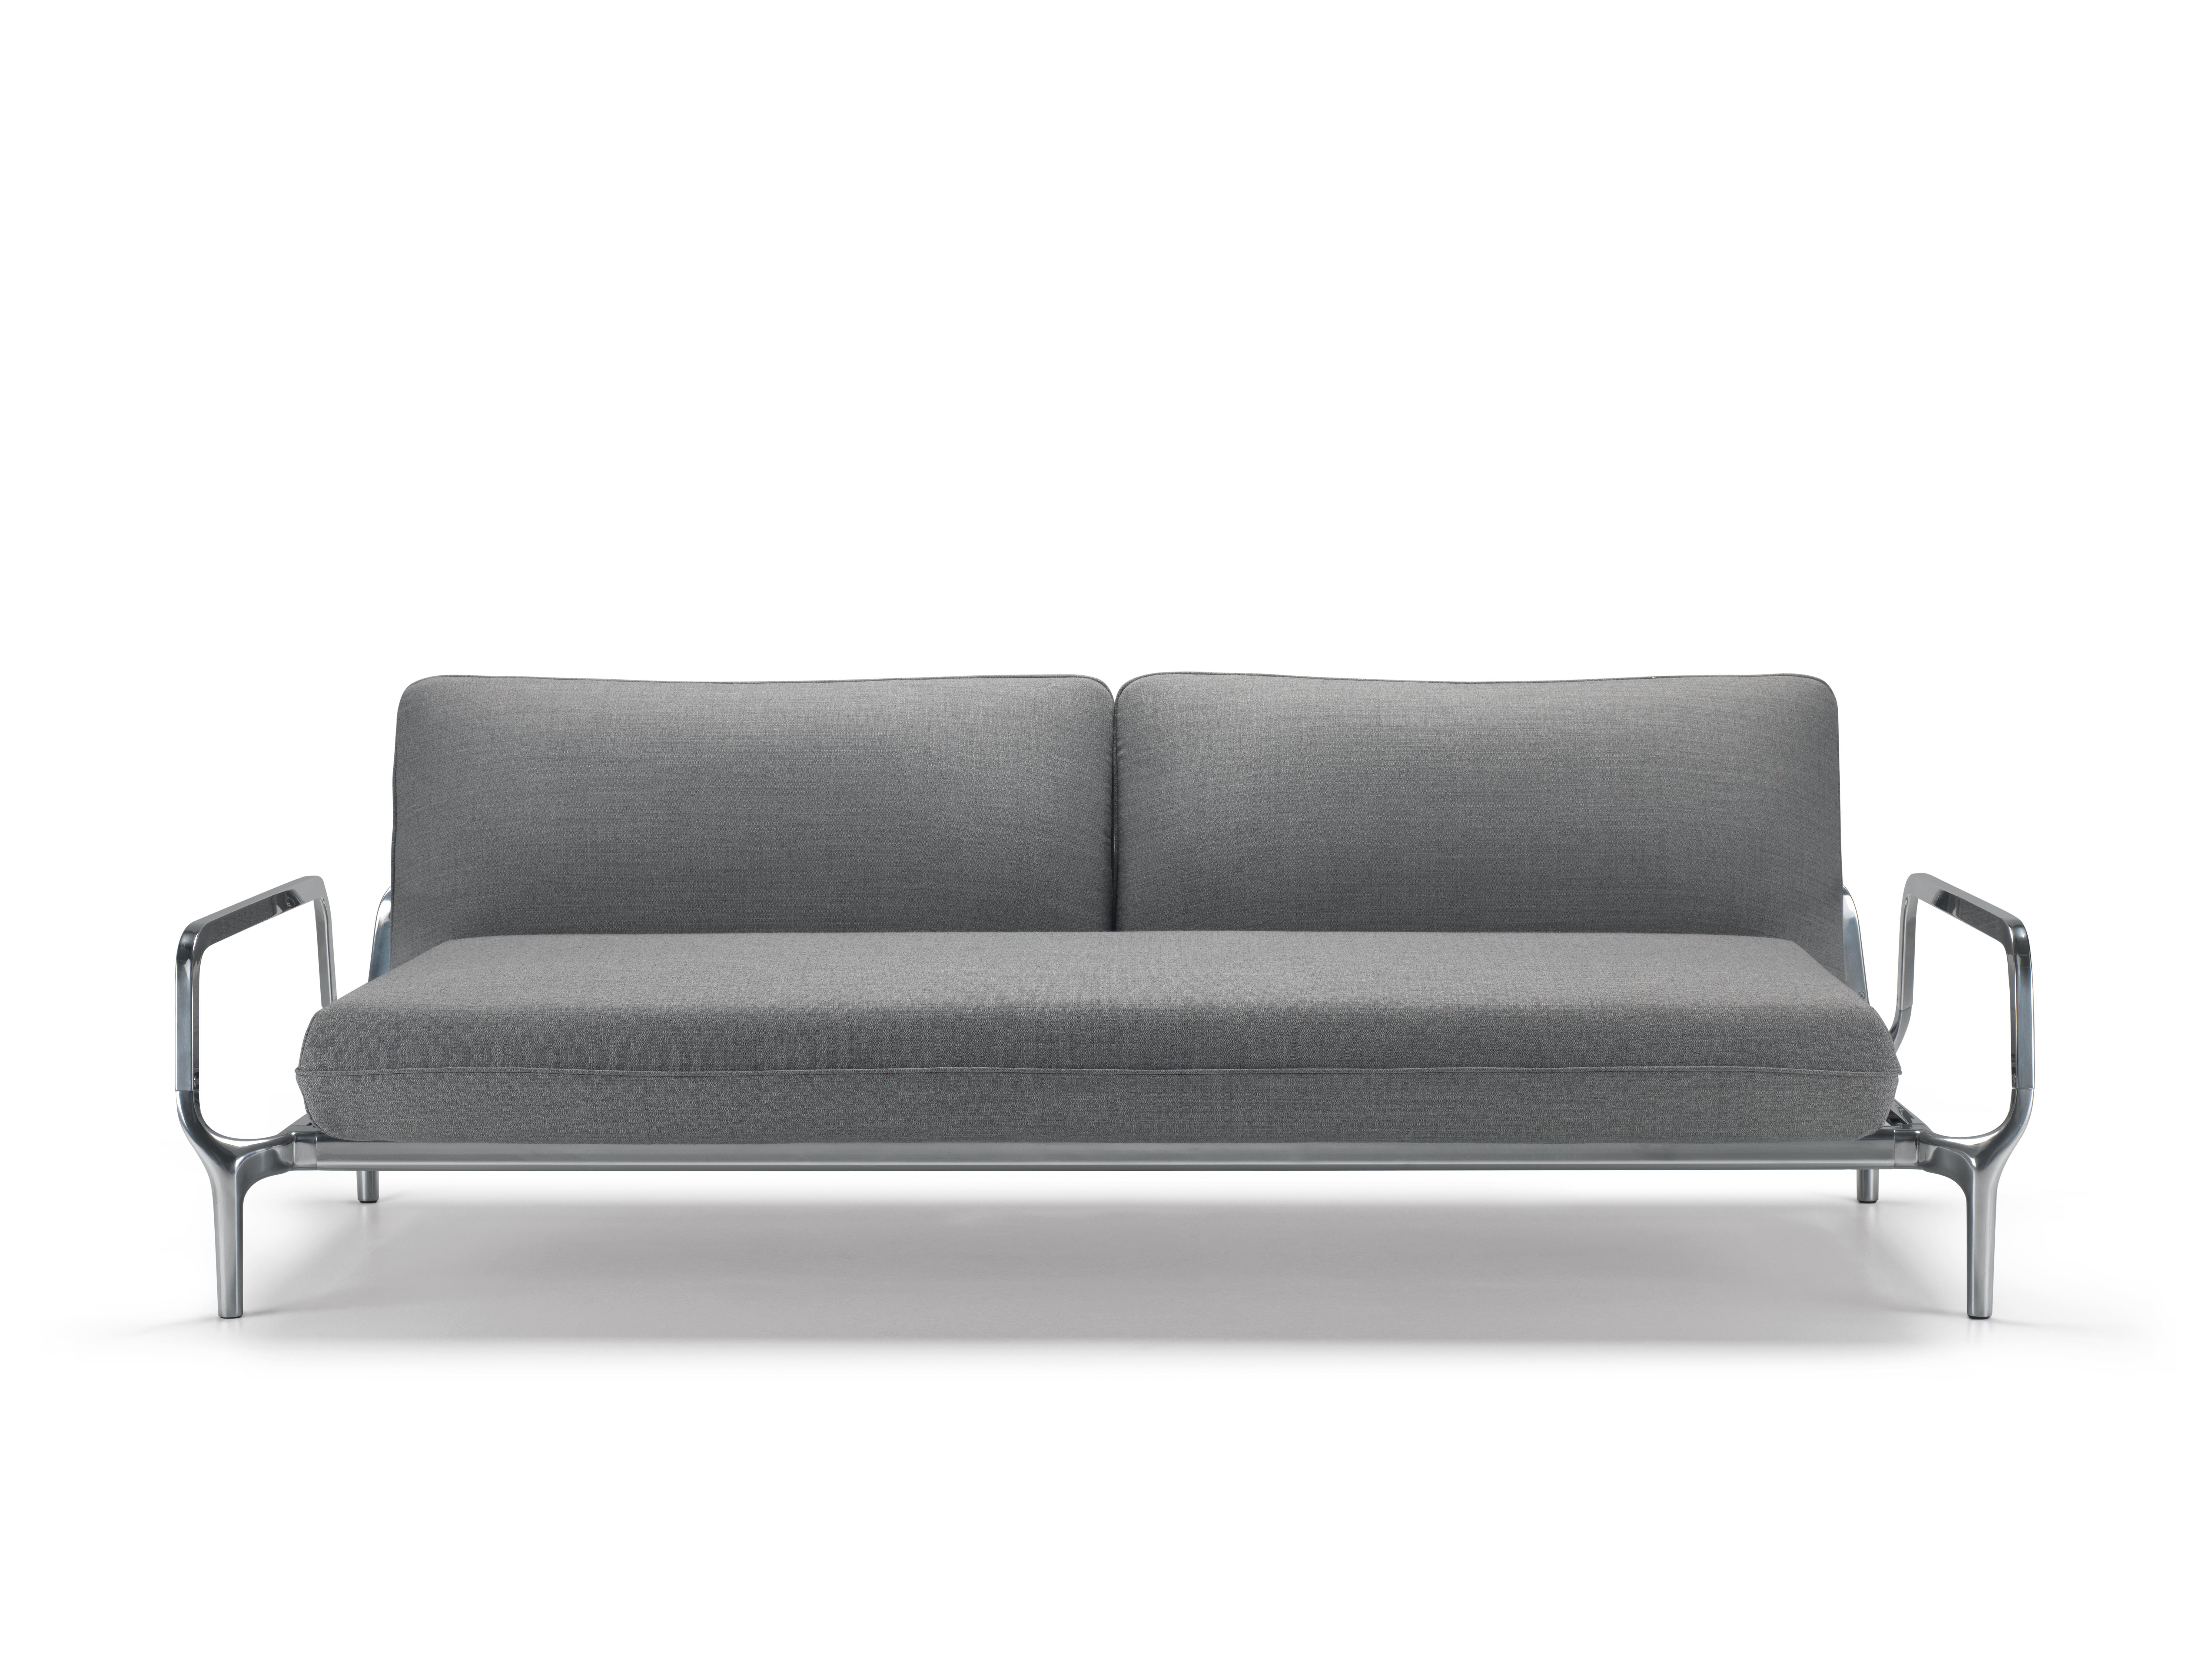 Alias V02 Vina Sofa in Grey Upholstery with Cushions and Polished Aluminum Frame In New Condition For Sale In Brooklyn, NY